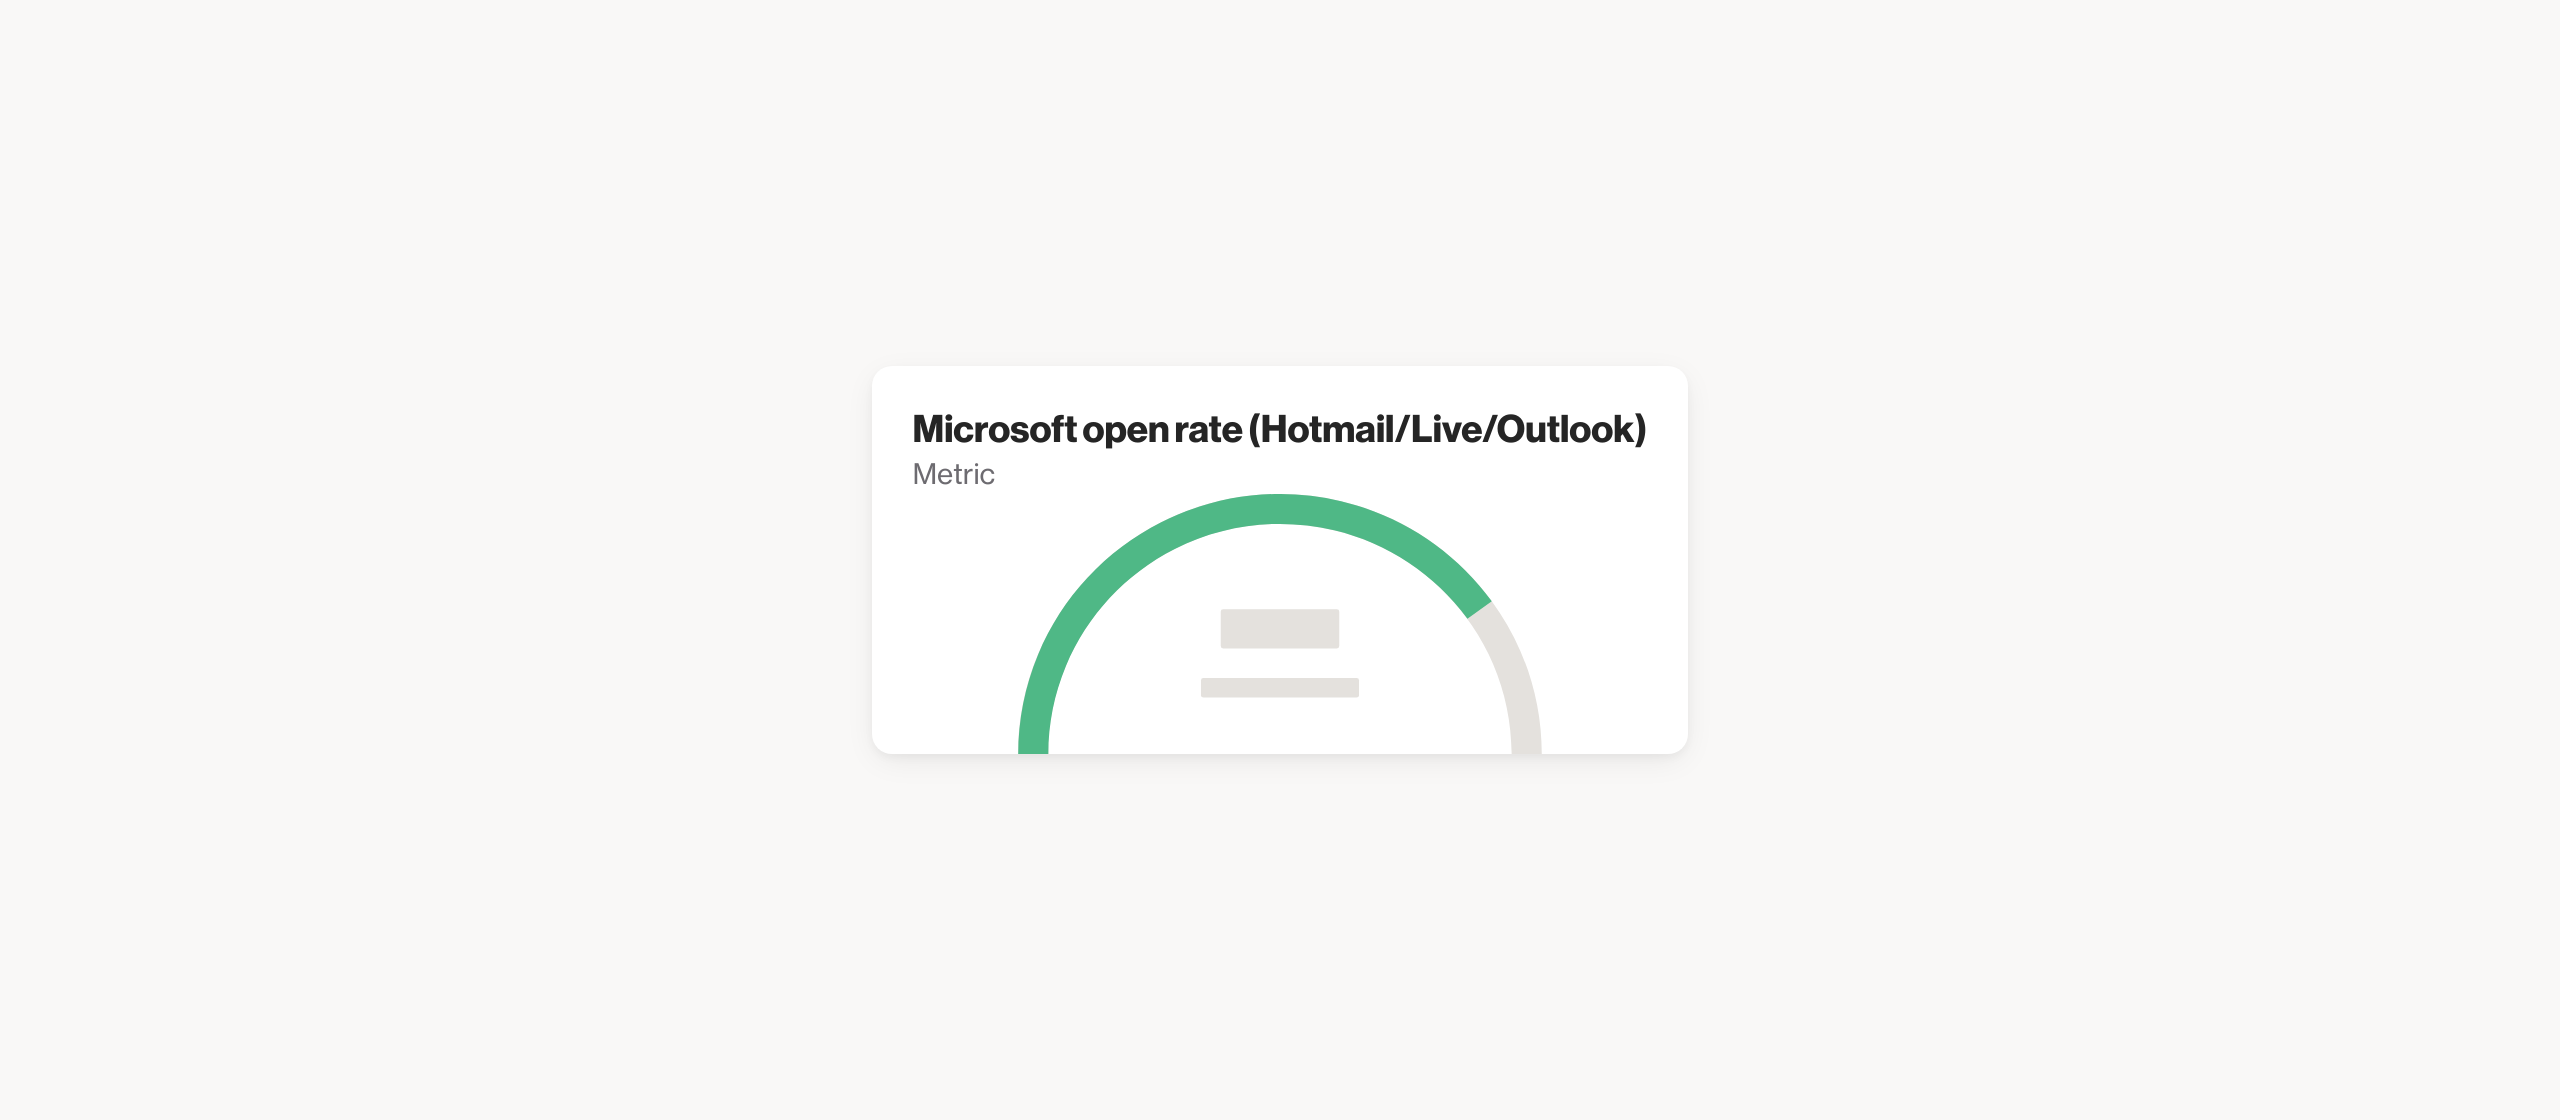 Microsoft open rate (Hotmail/Live/Outlook)